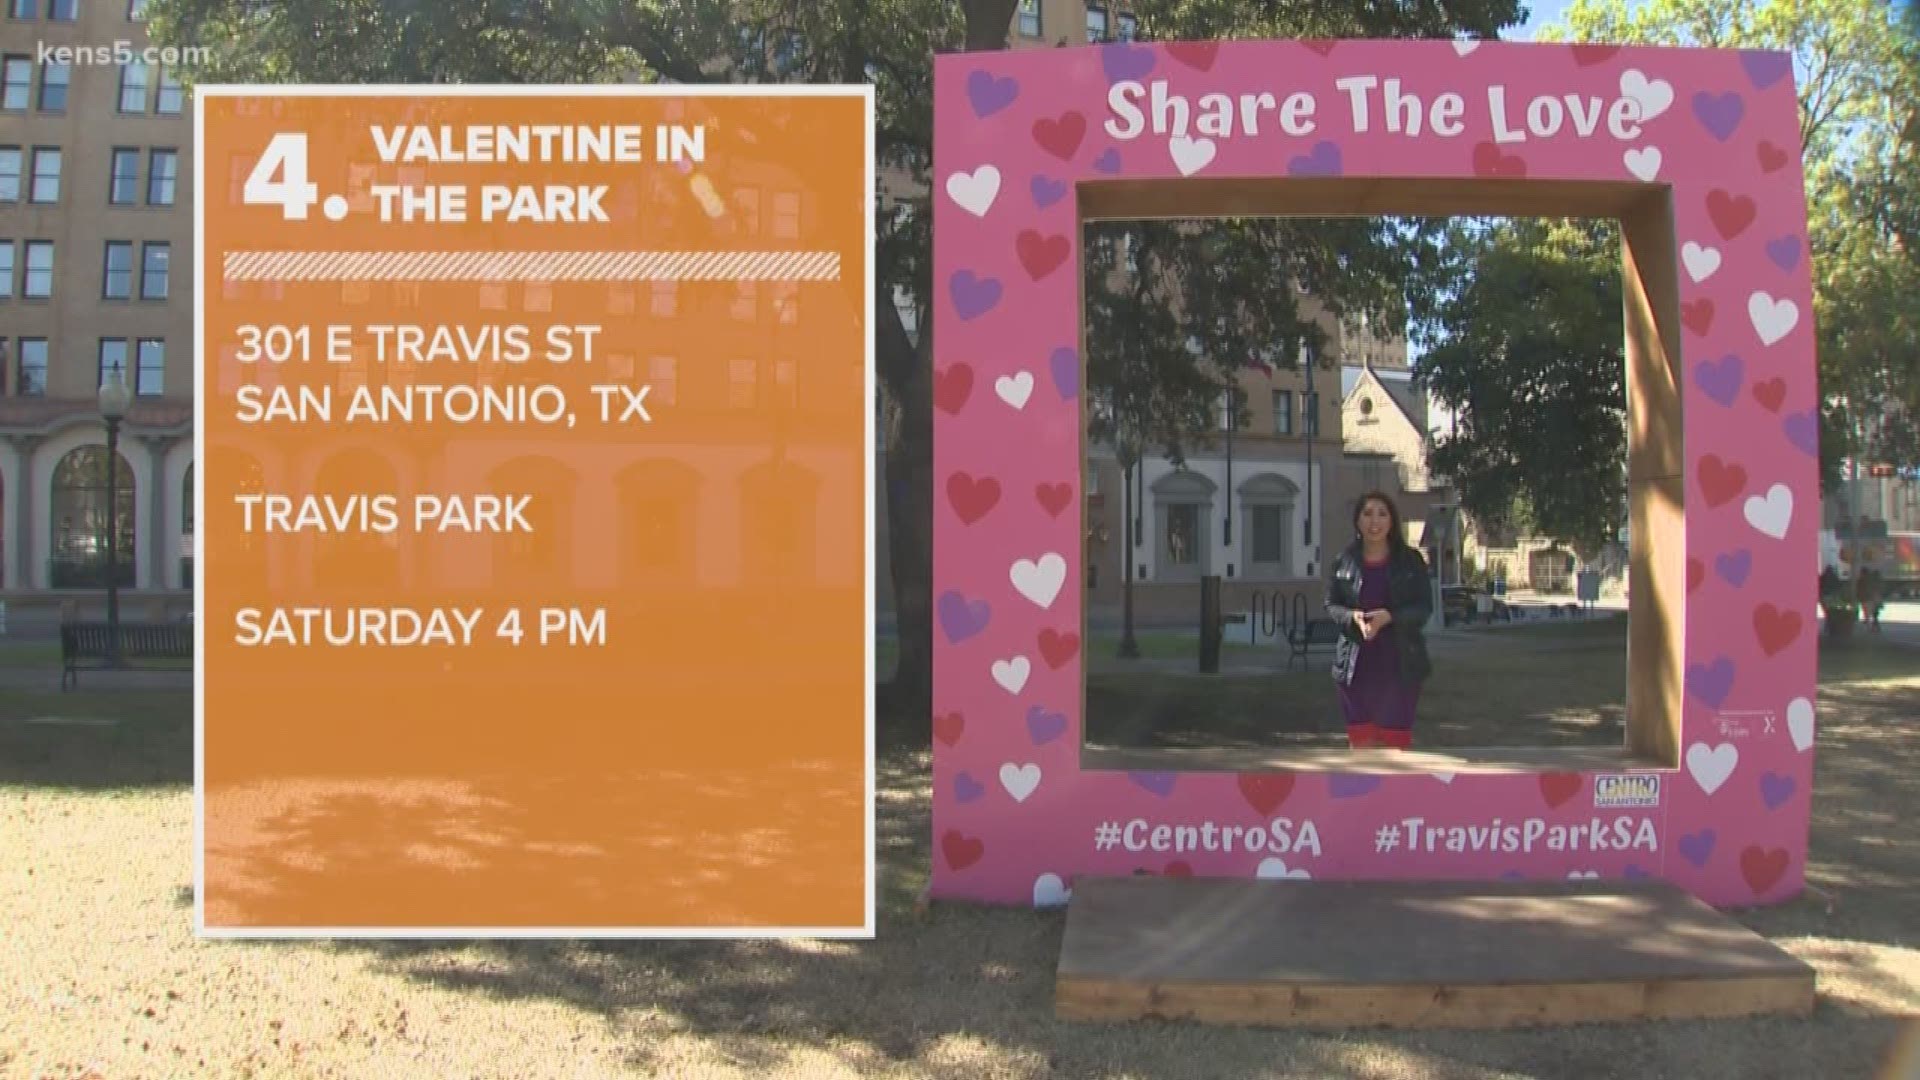 We're taking a look at all of the fun, free events you can do with your Galentine or Valentine this weekend.